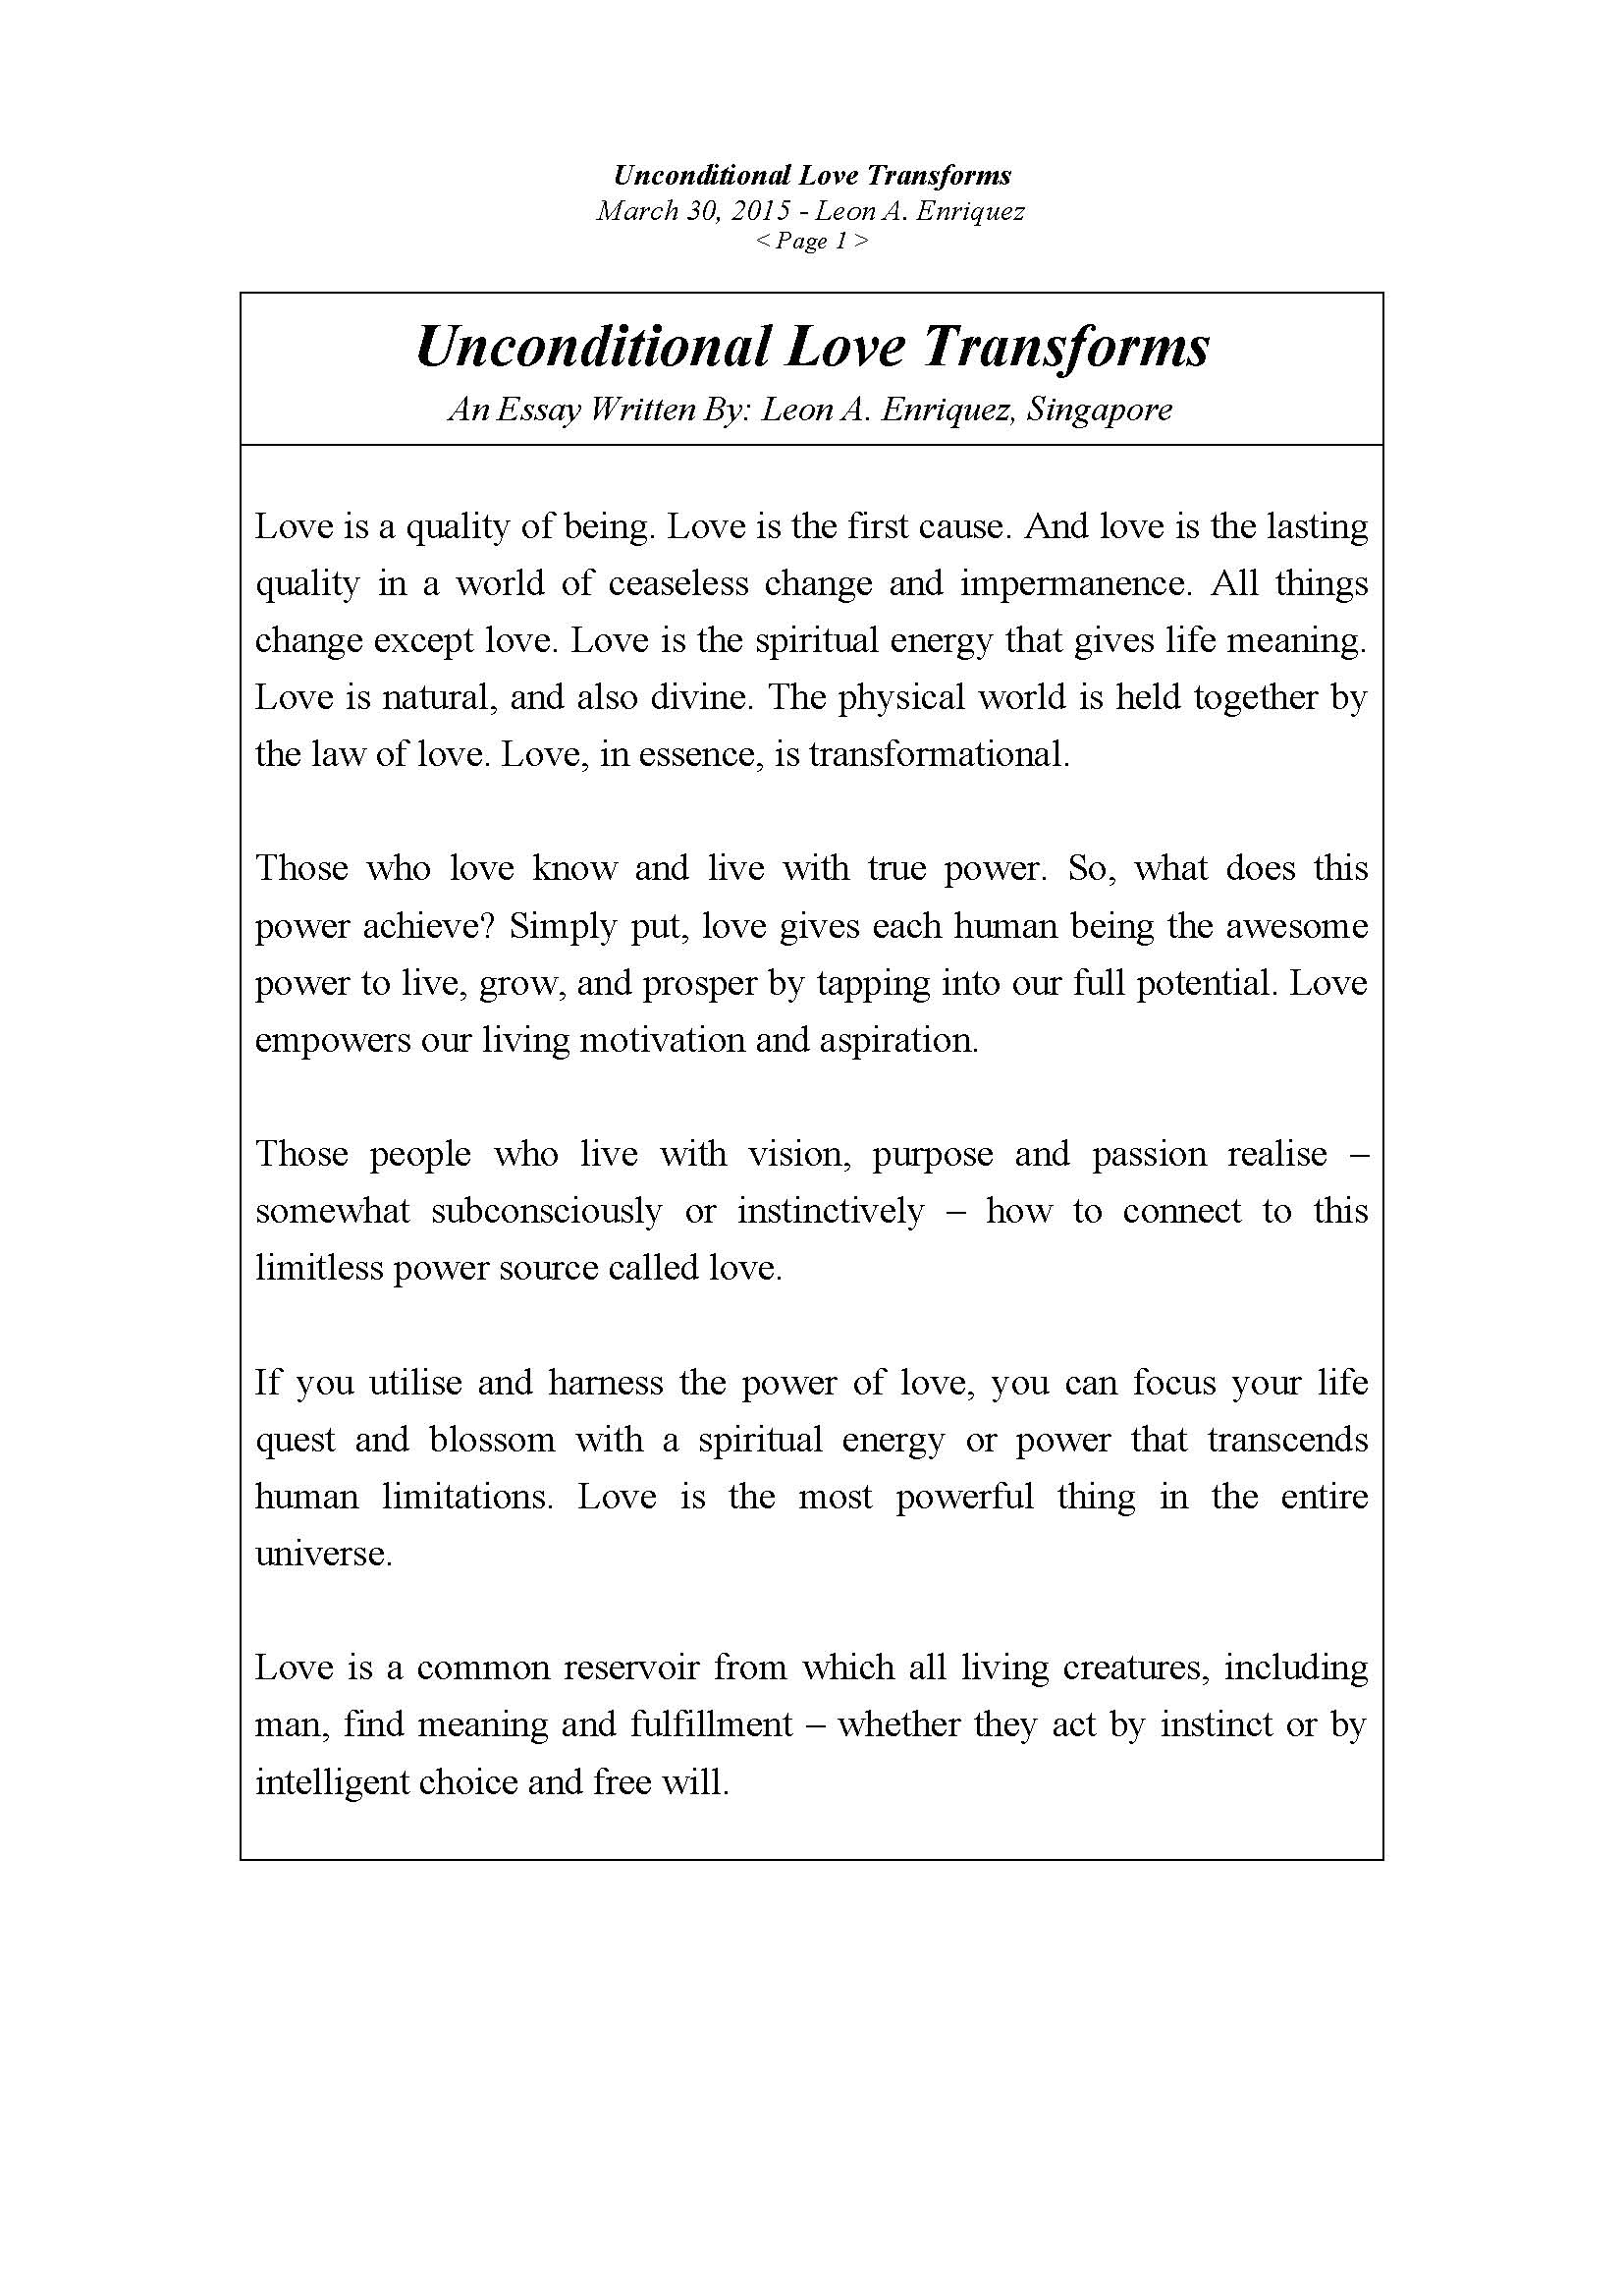 Definition of Love Essay Example | Topics and Well Written Essays - words